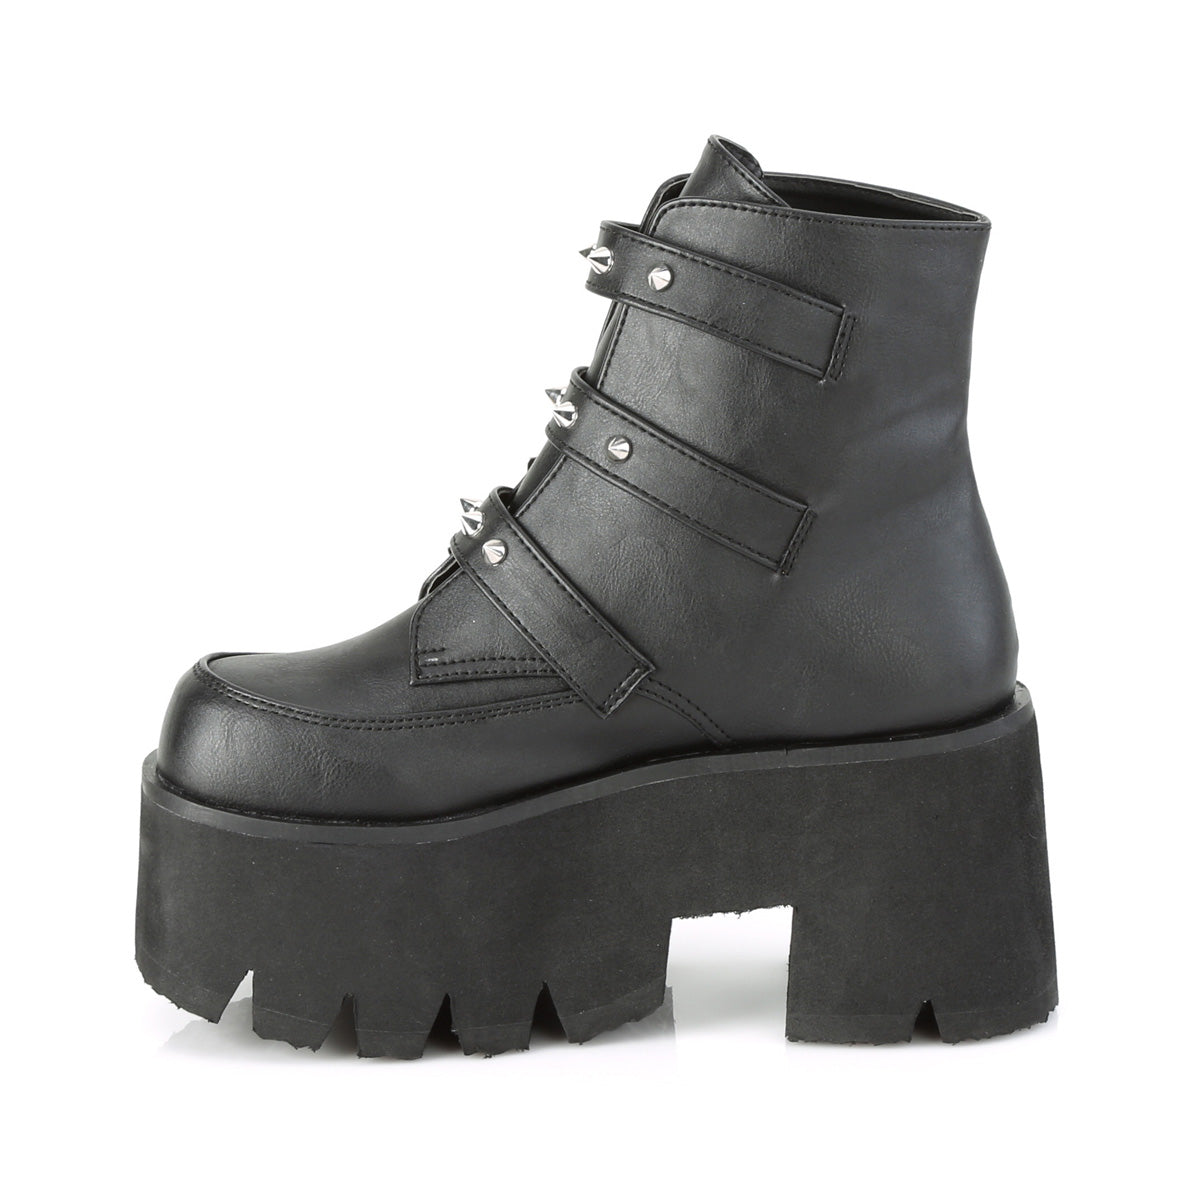 ASHES-55 - Blk Vegan Leather